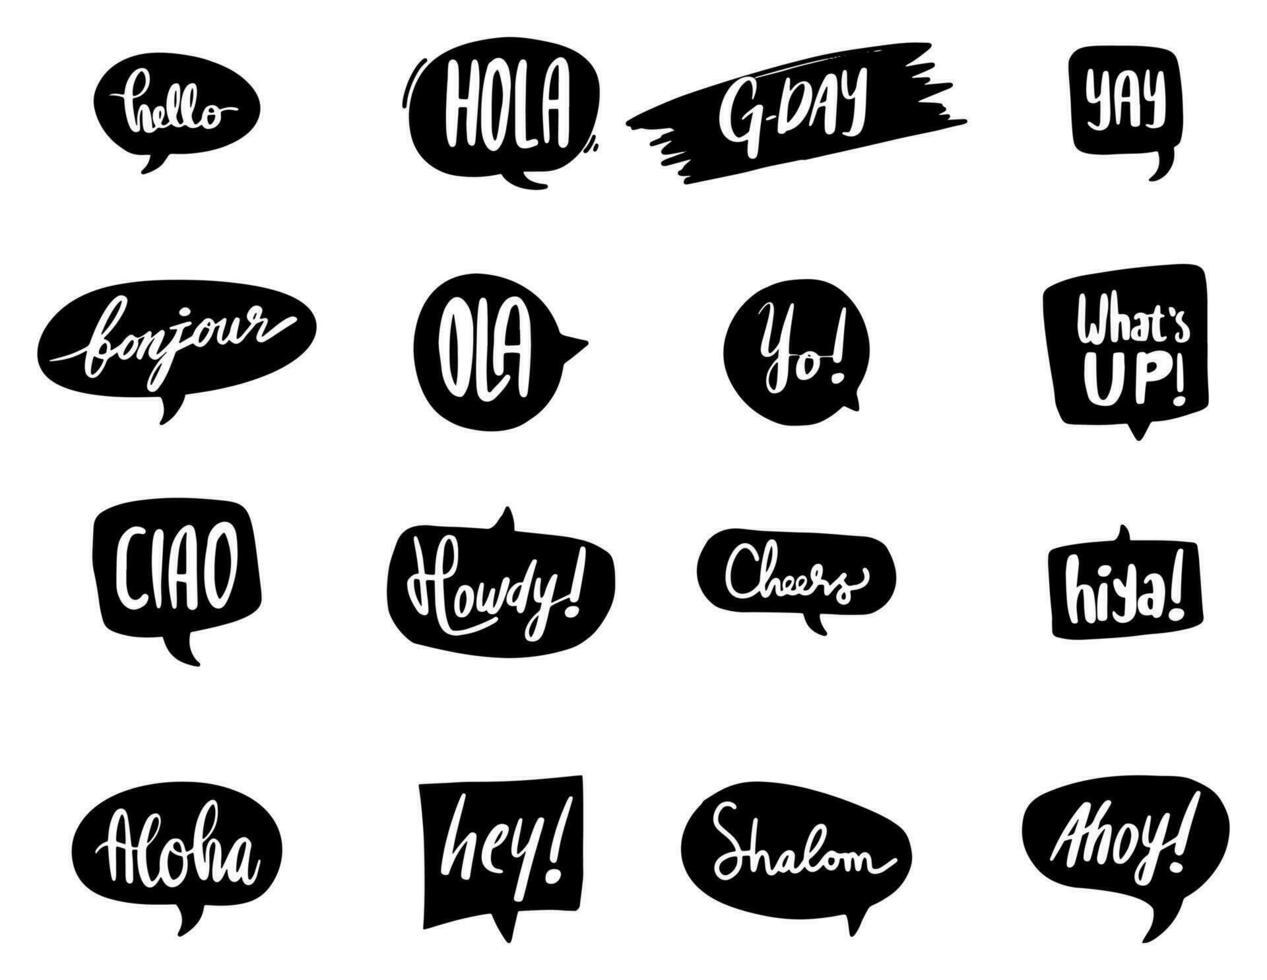 Hello word in different languages. french, spanish. Bonjour, yay, howdy, hiya, shalom, ahoy, hey, what's up, g-day, hola, aloha, ciao, words in speech bubbles vector